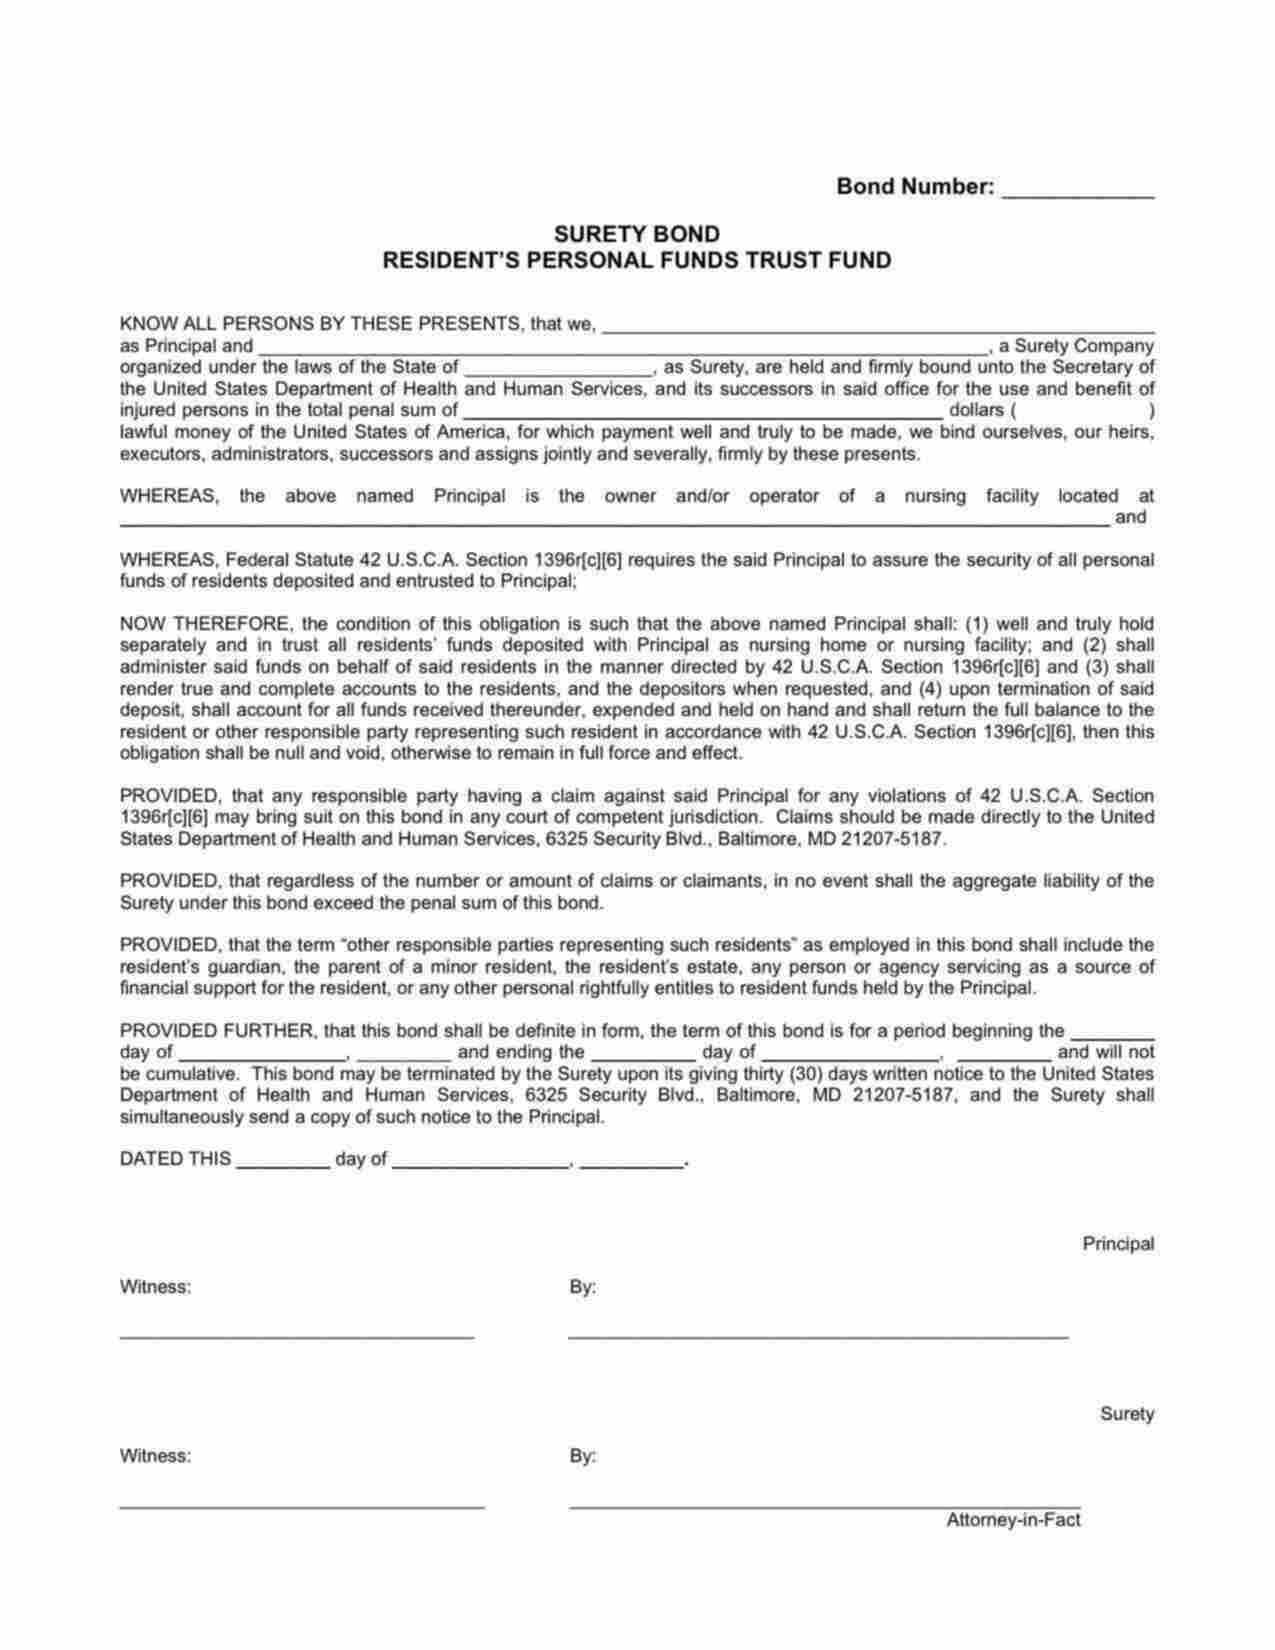 Federal Resident's Personal Funds Trust Fund Bond Form